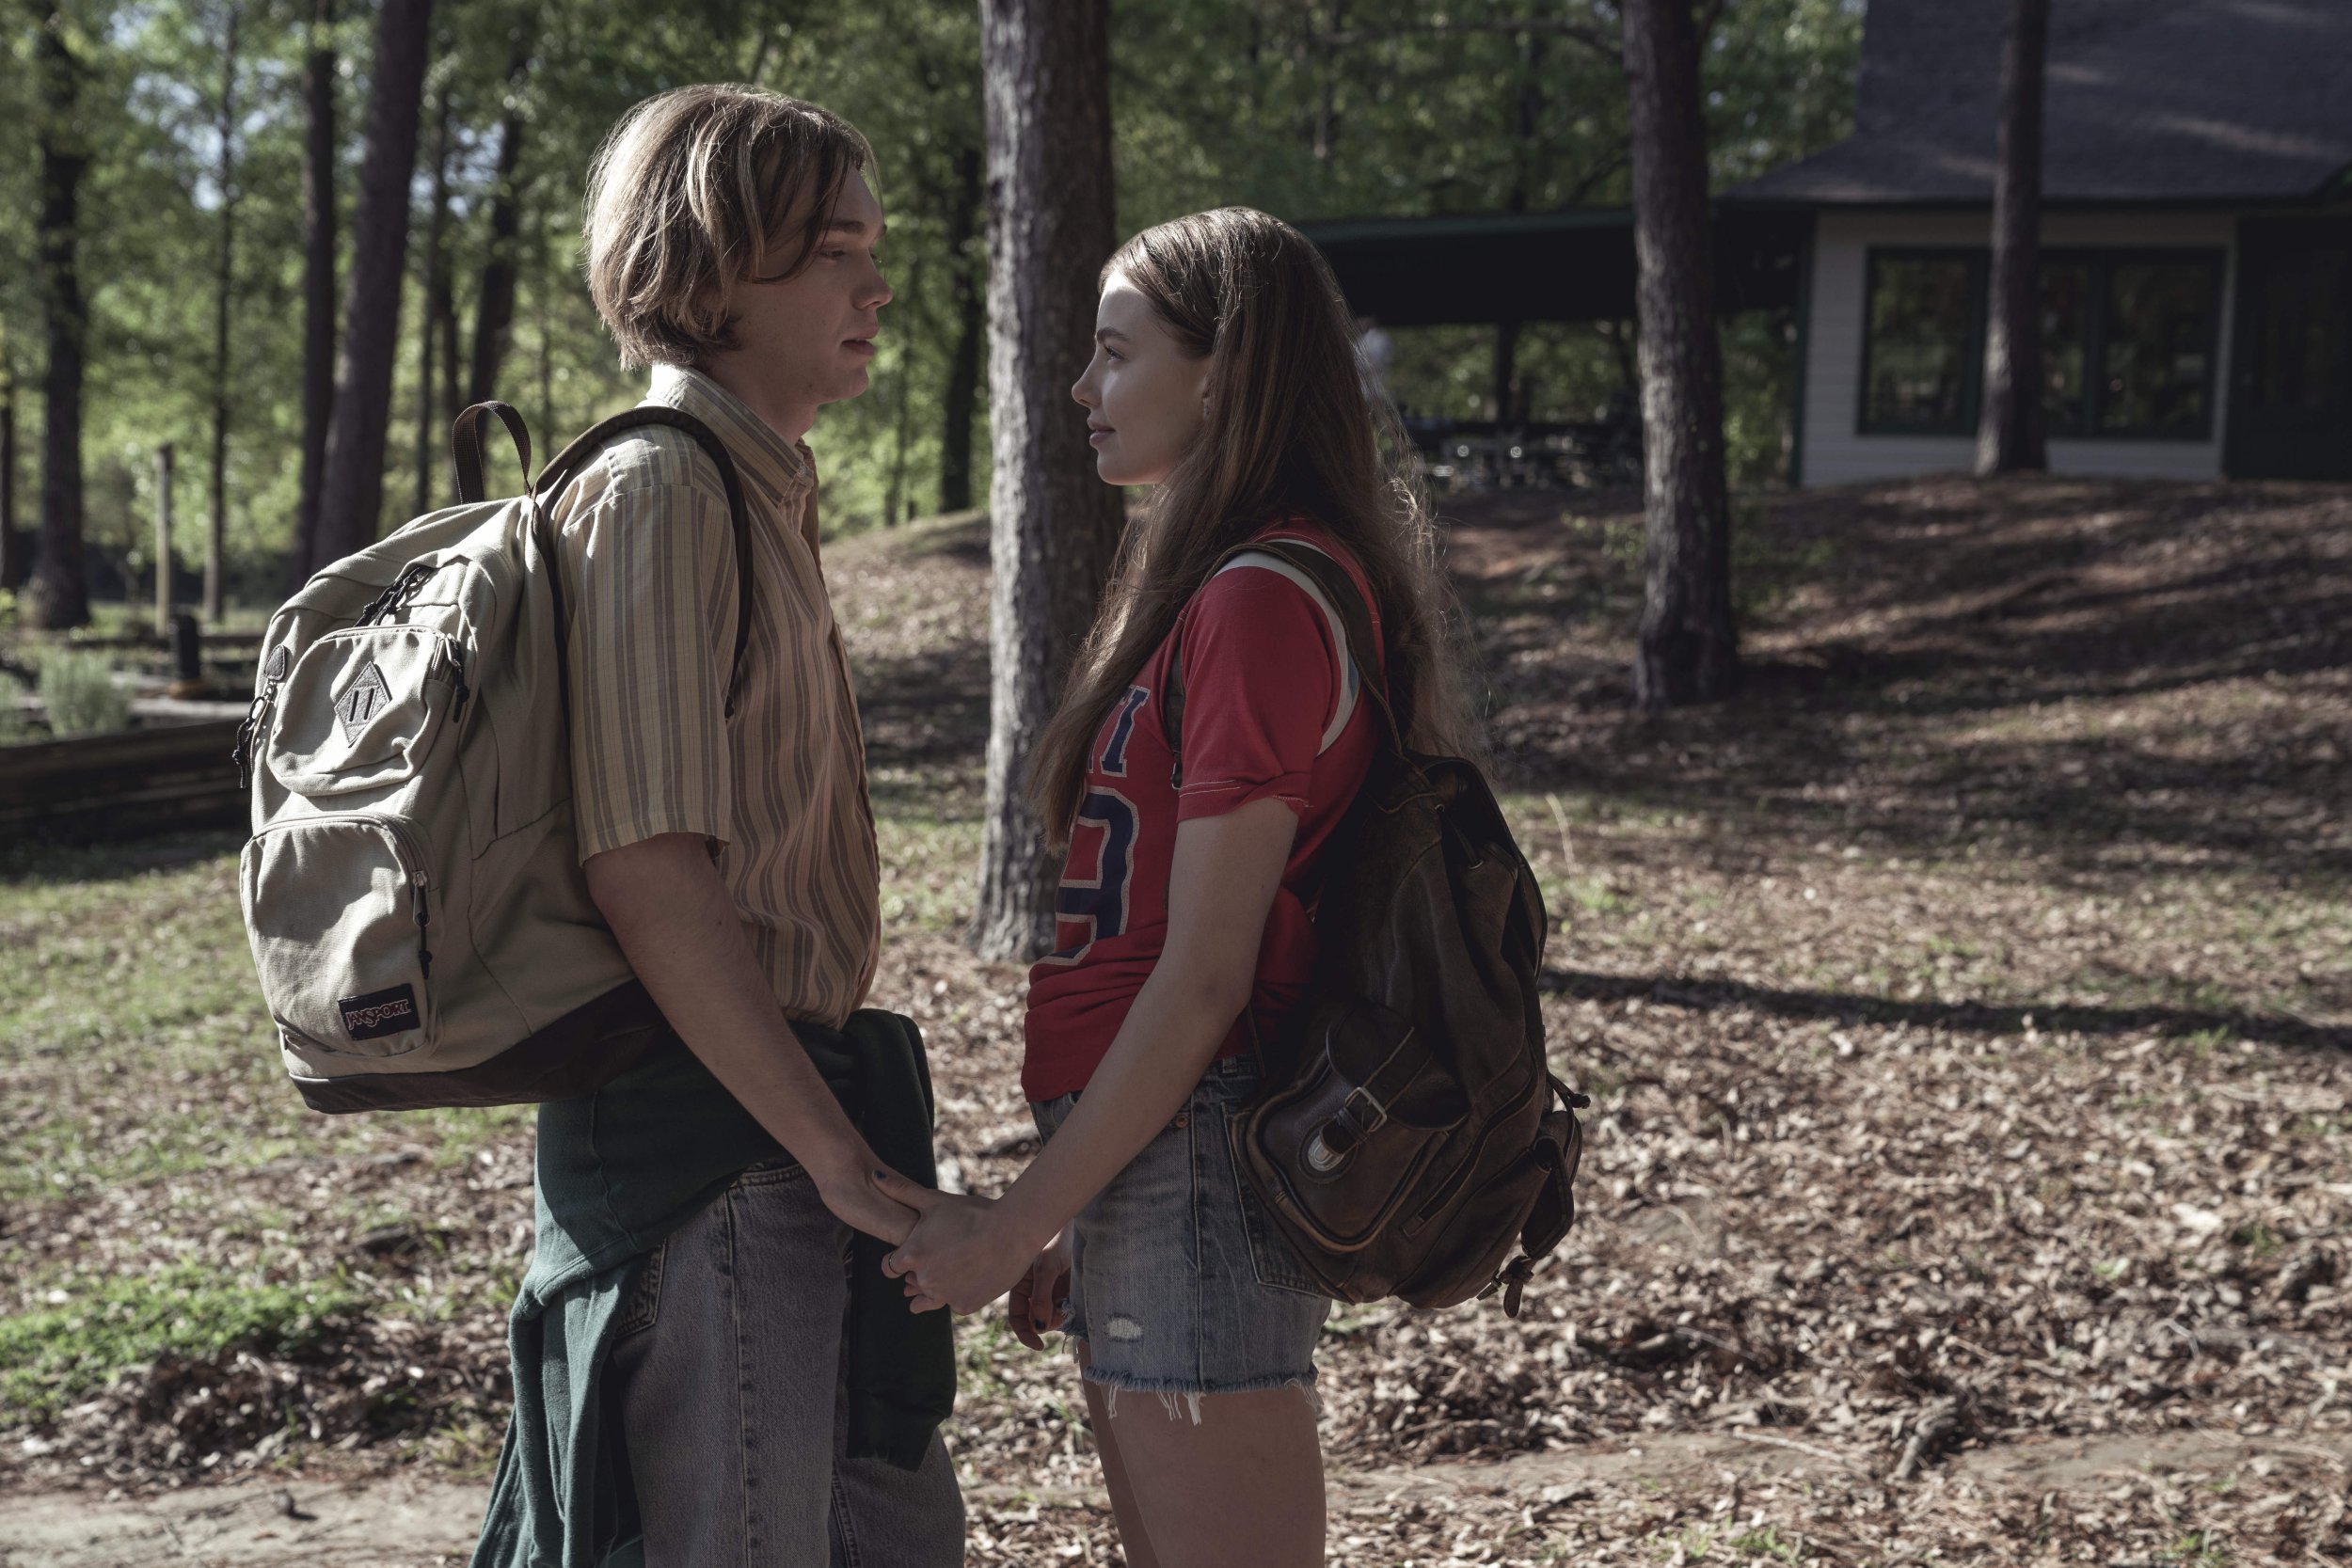 Will ‘Looking For Alaska’ Return For Season 2? Renewal, Cancellation Details